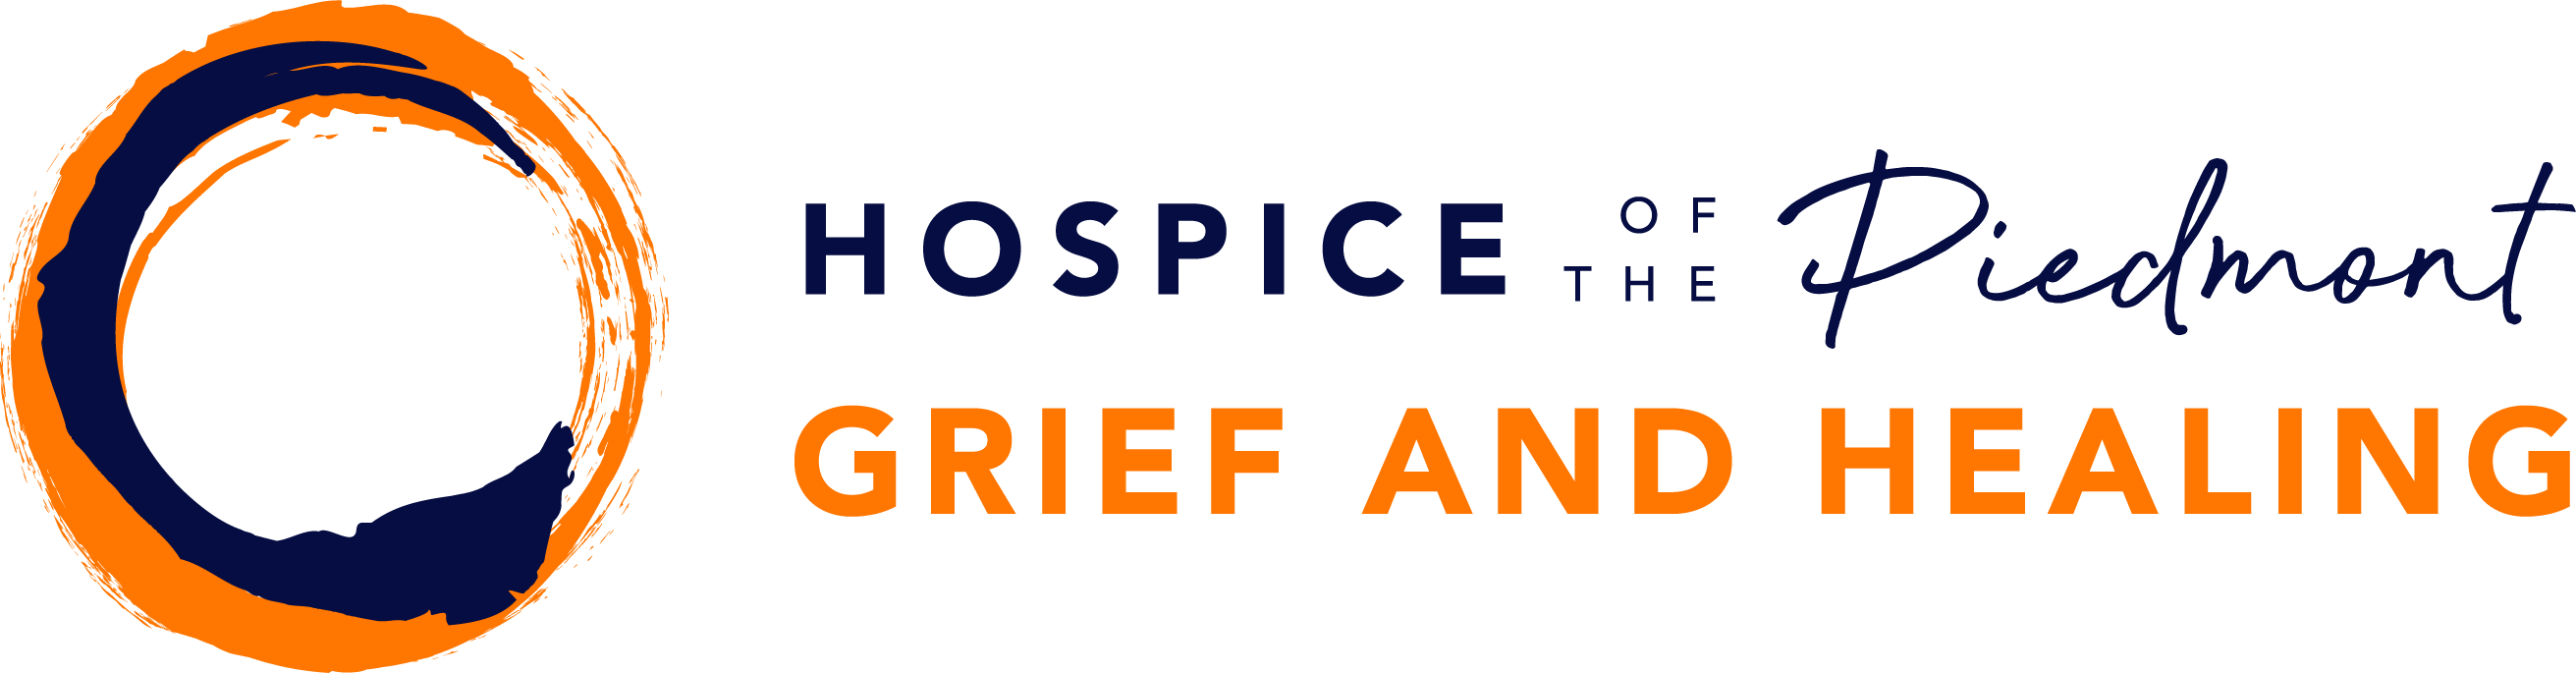 Navy blue and orange Hospice of the Piedmont Grief and Healing logo.